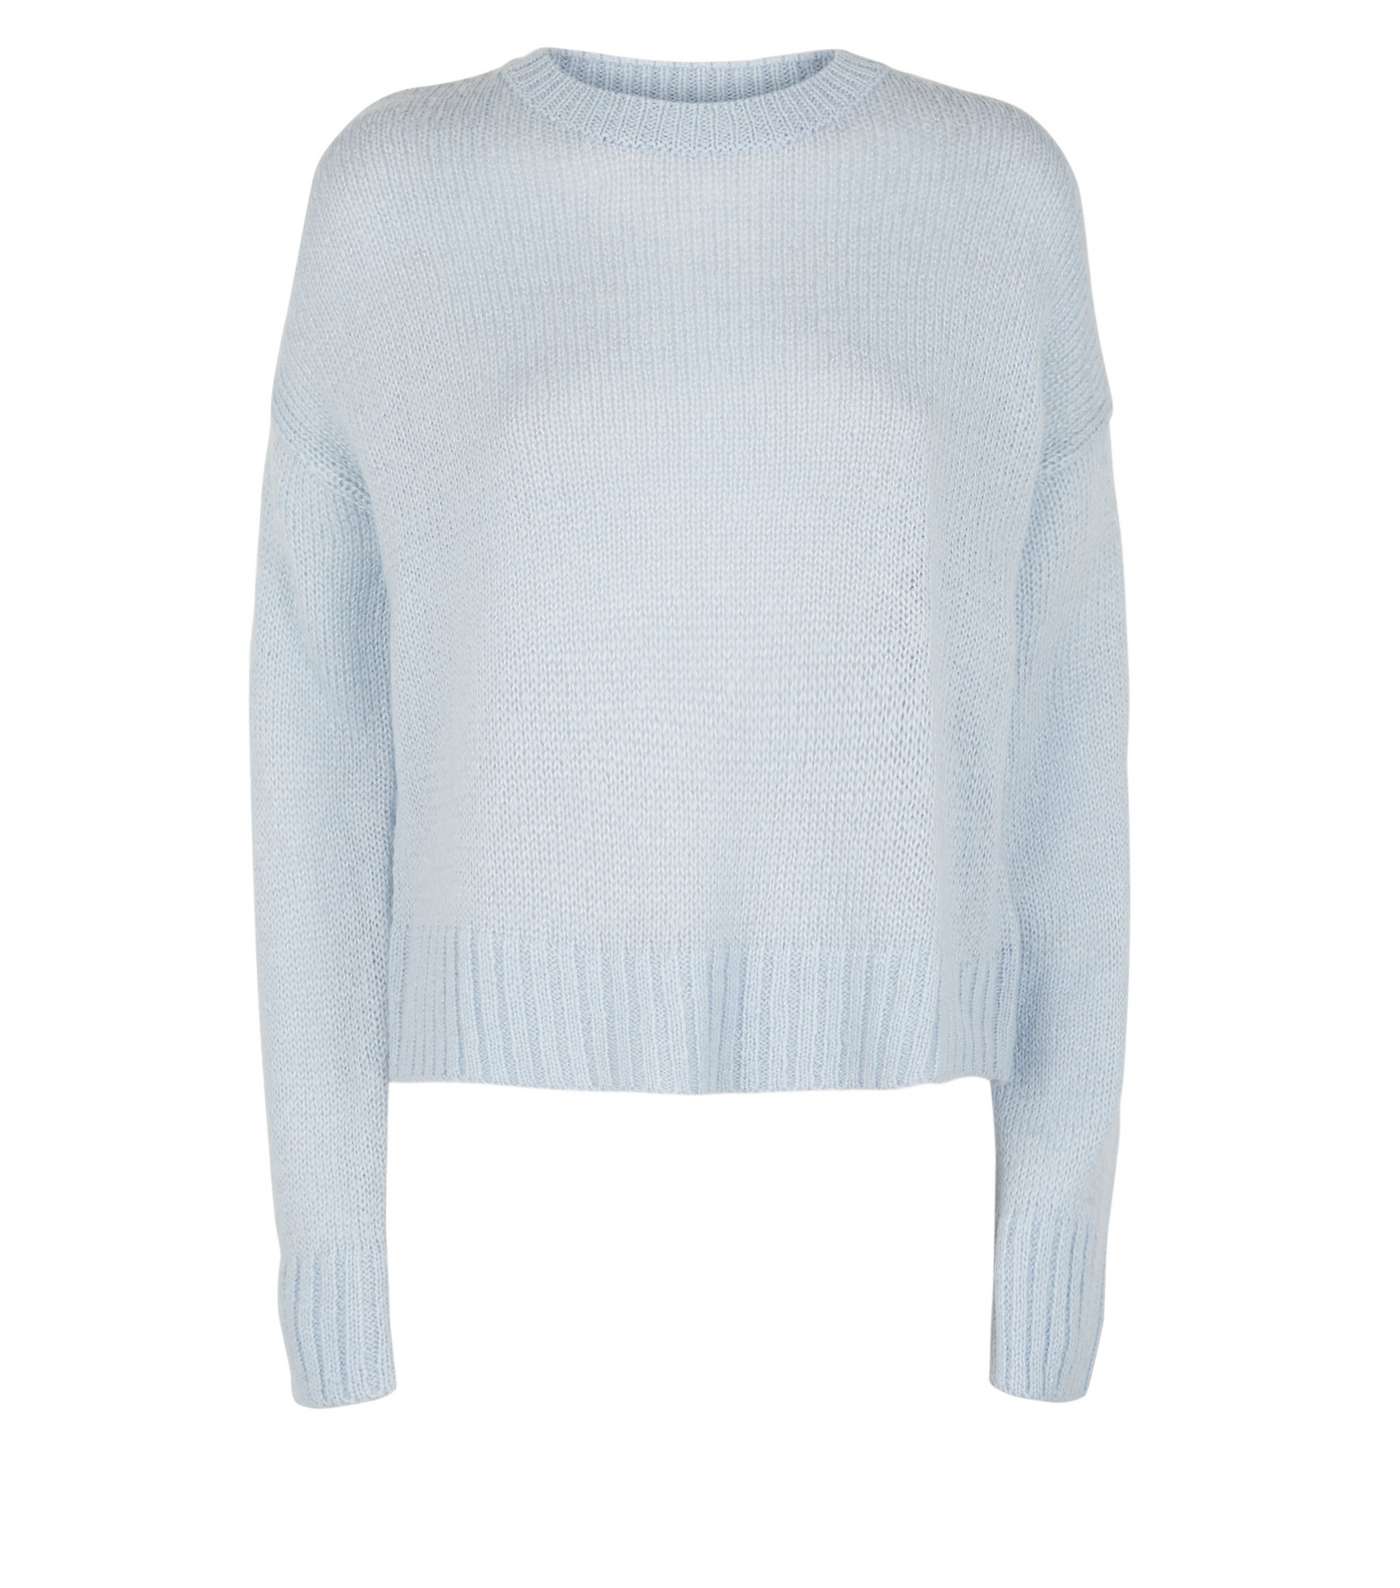 Tall Pale Blue Crew Neck Jumper Image 4